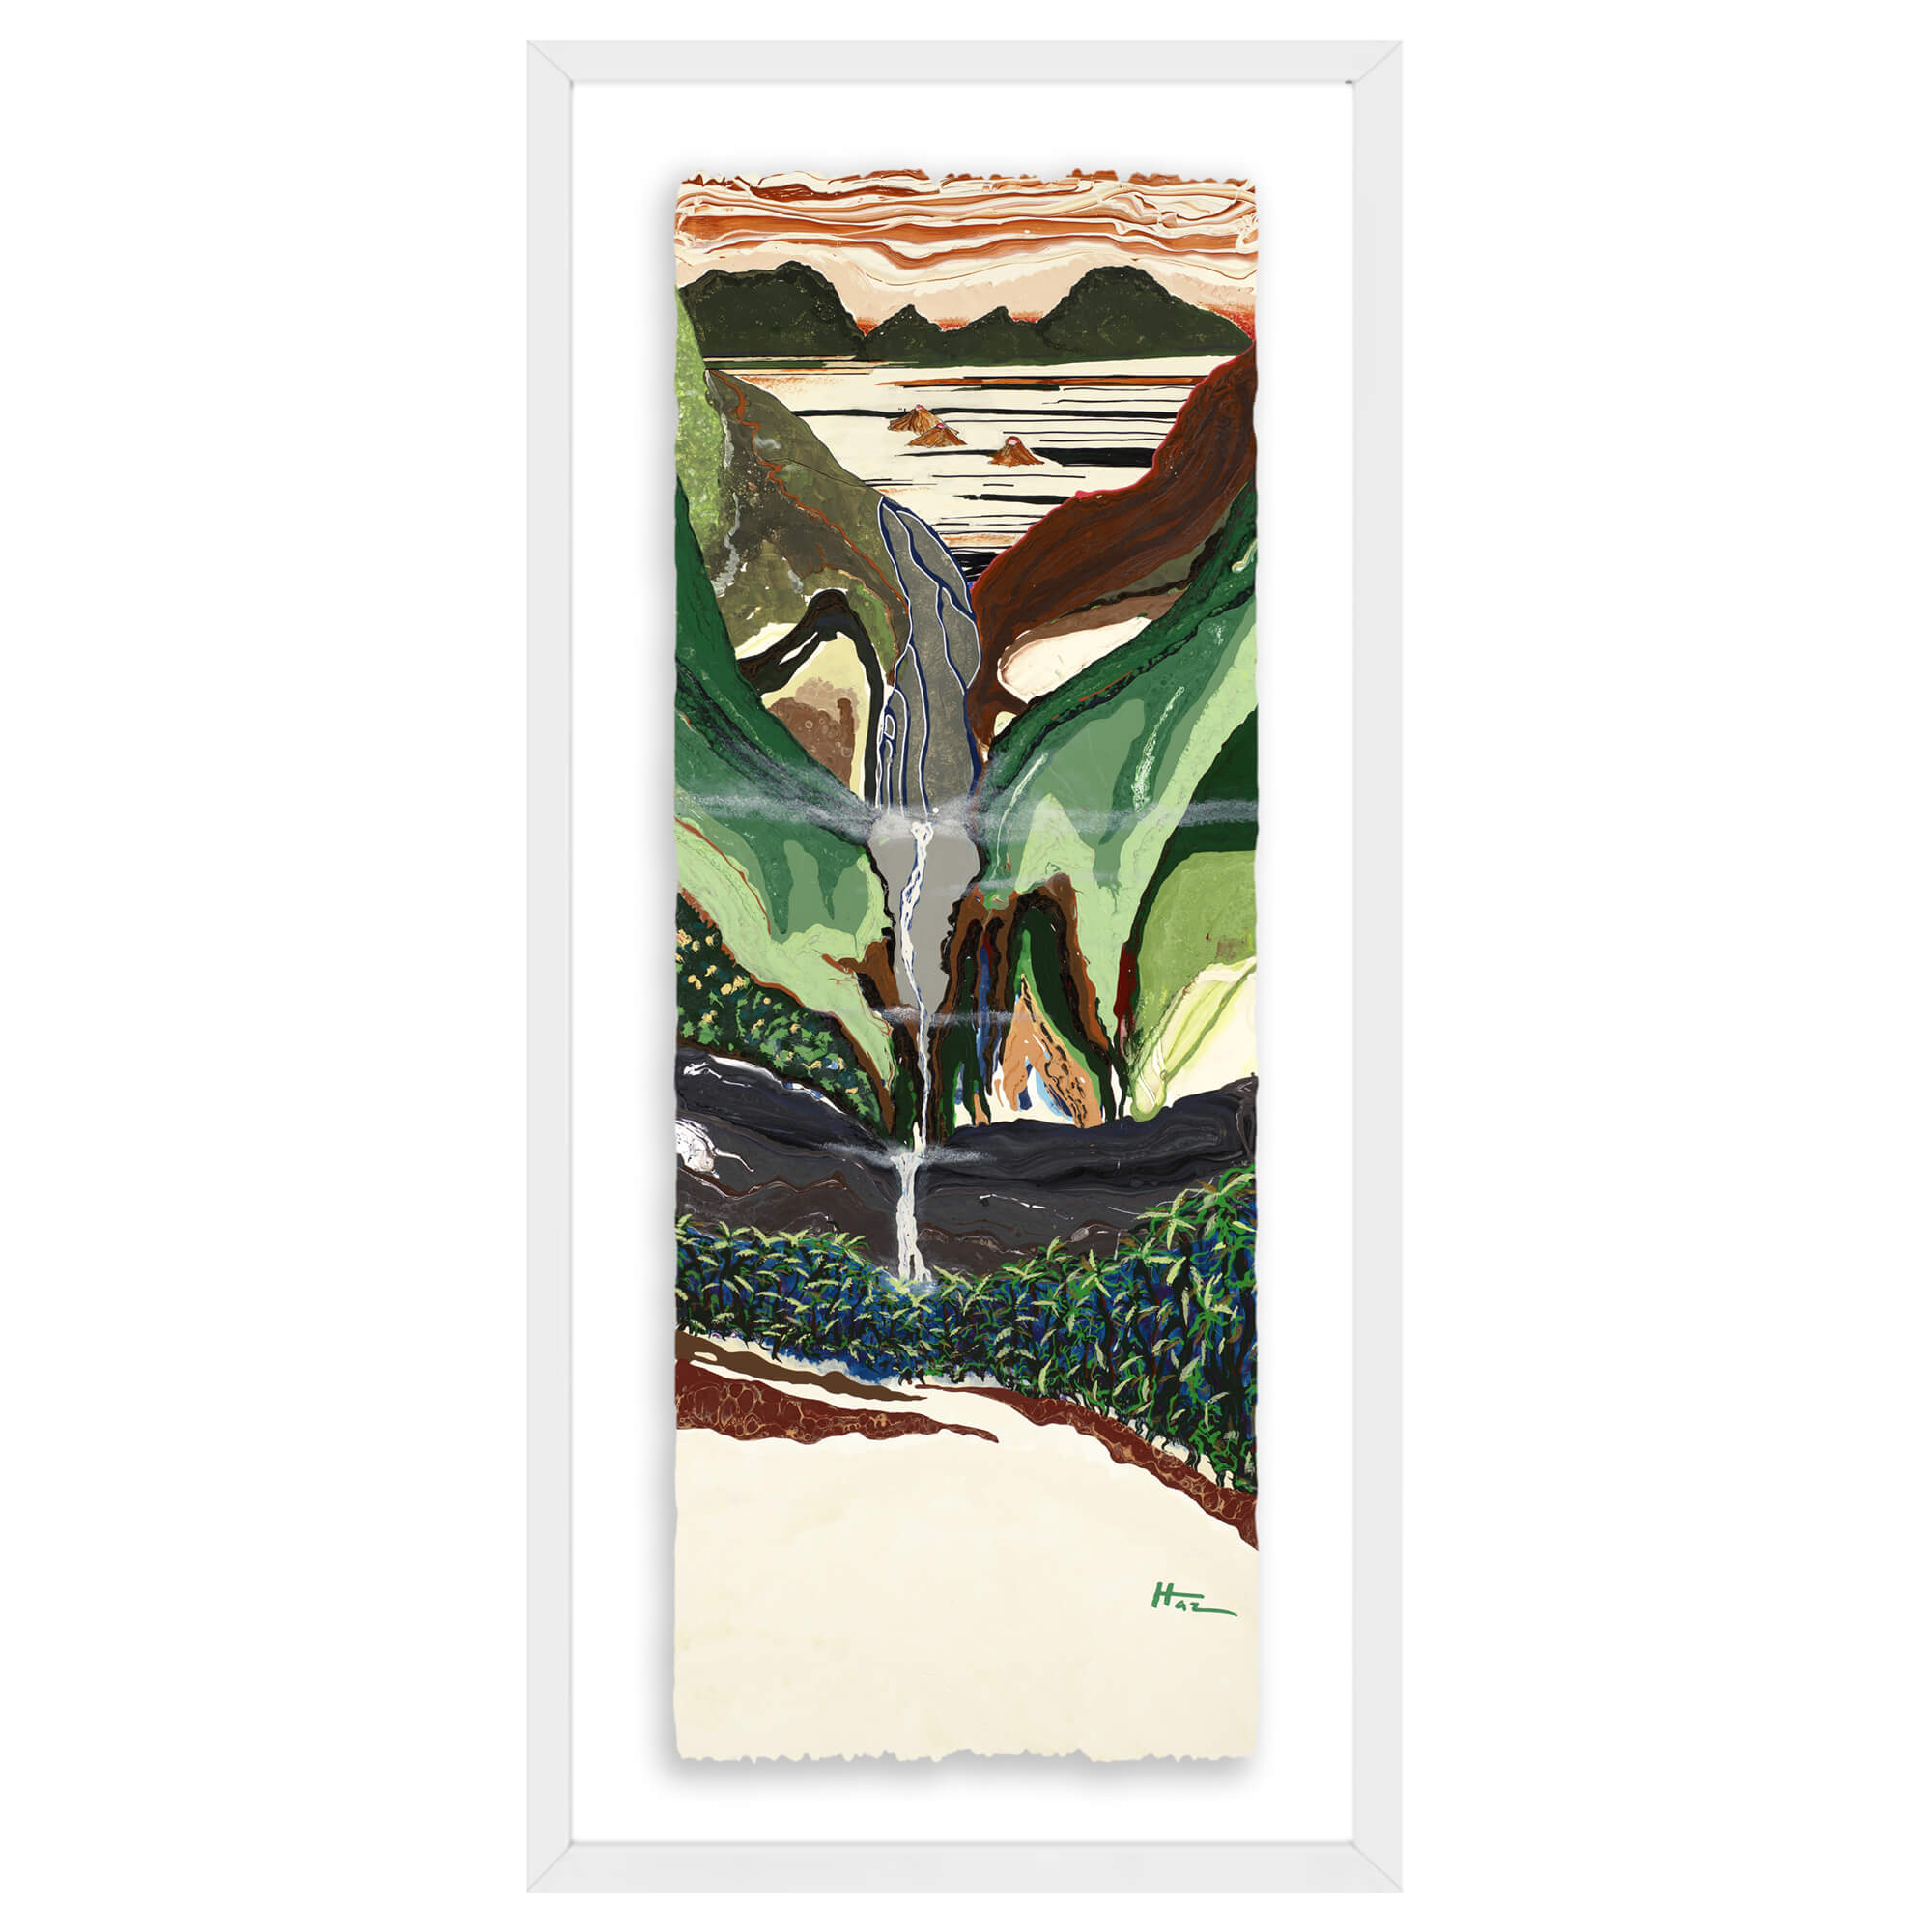 Paper art print with white frame showcasing fresh greeneries and lush green leaves by hawaii artist robert hazzard